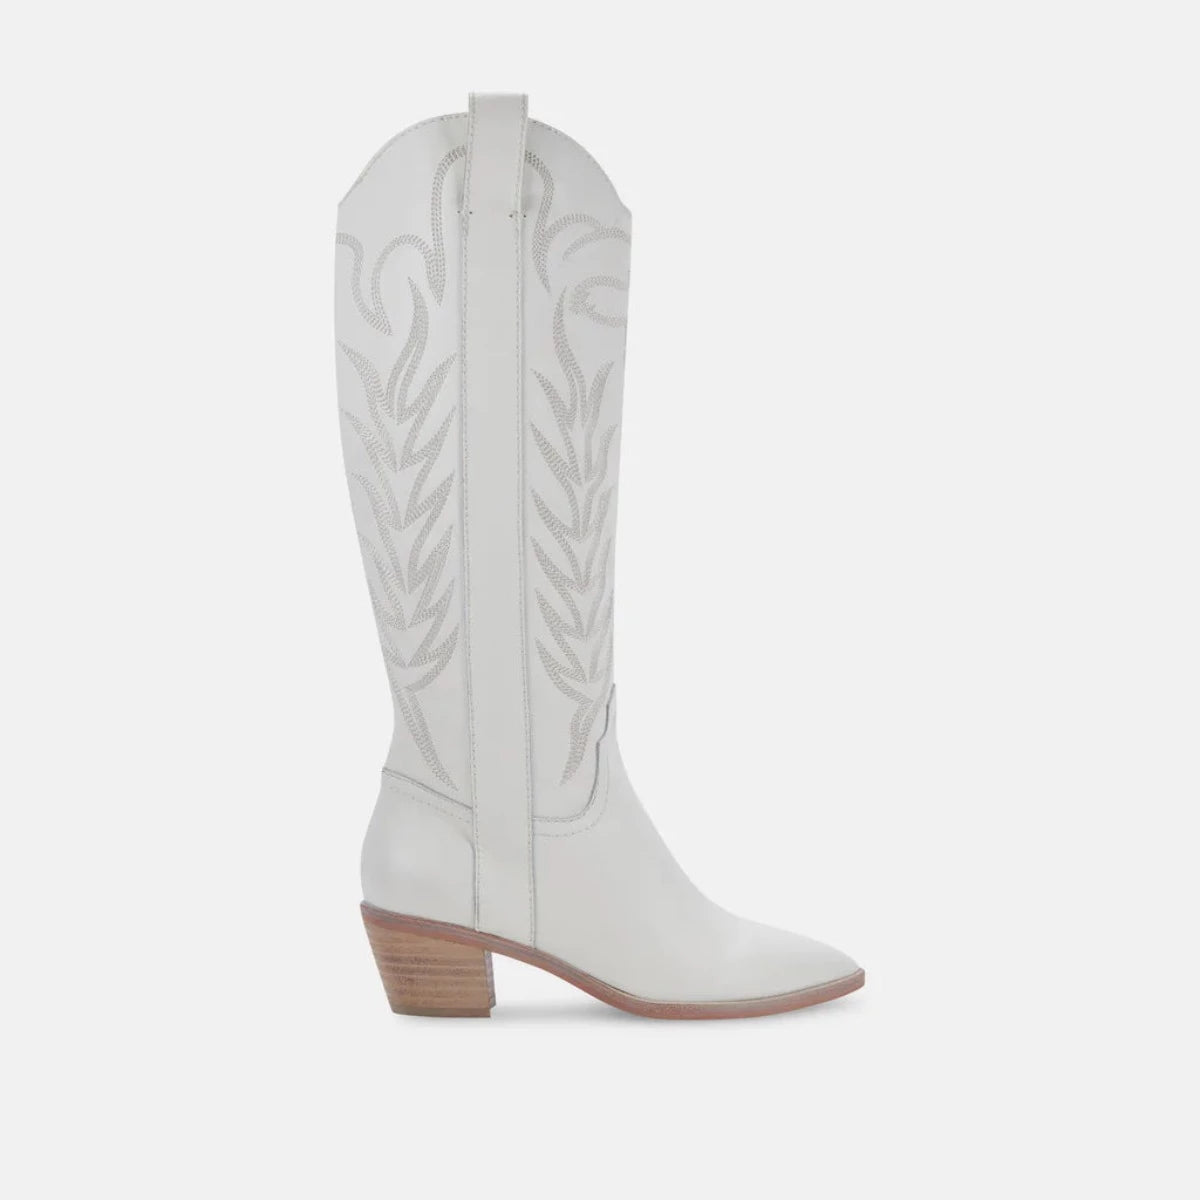 Solei boot- white embossed leather